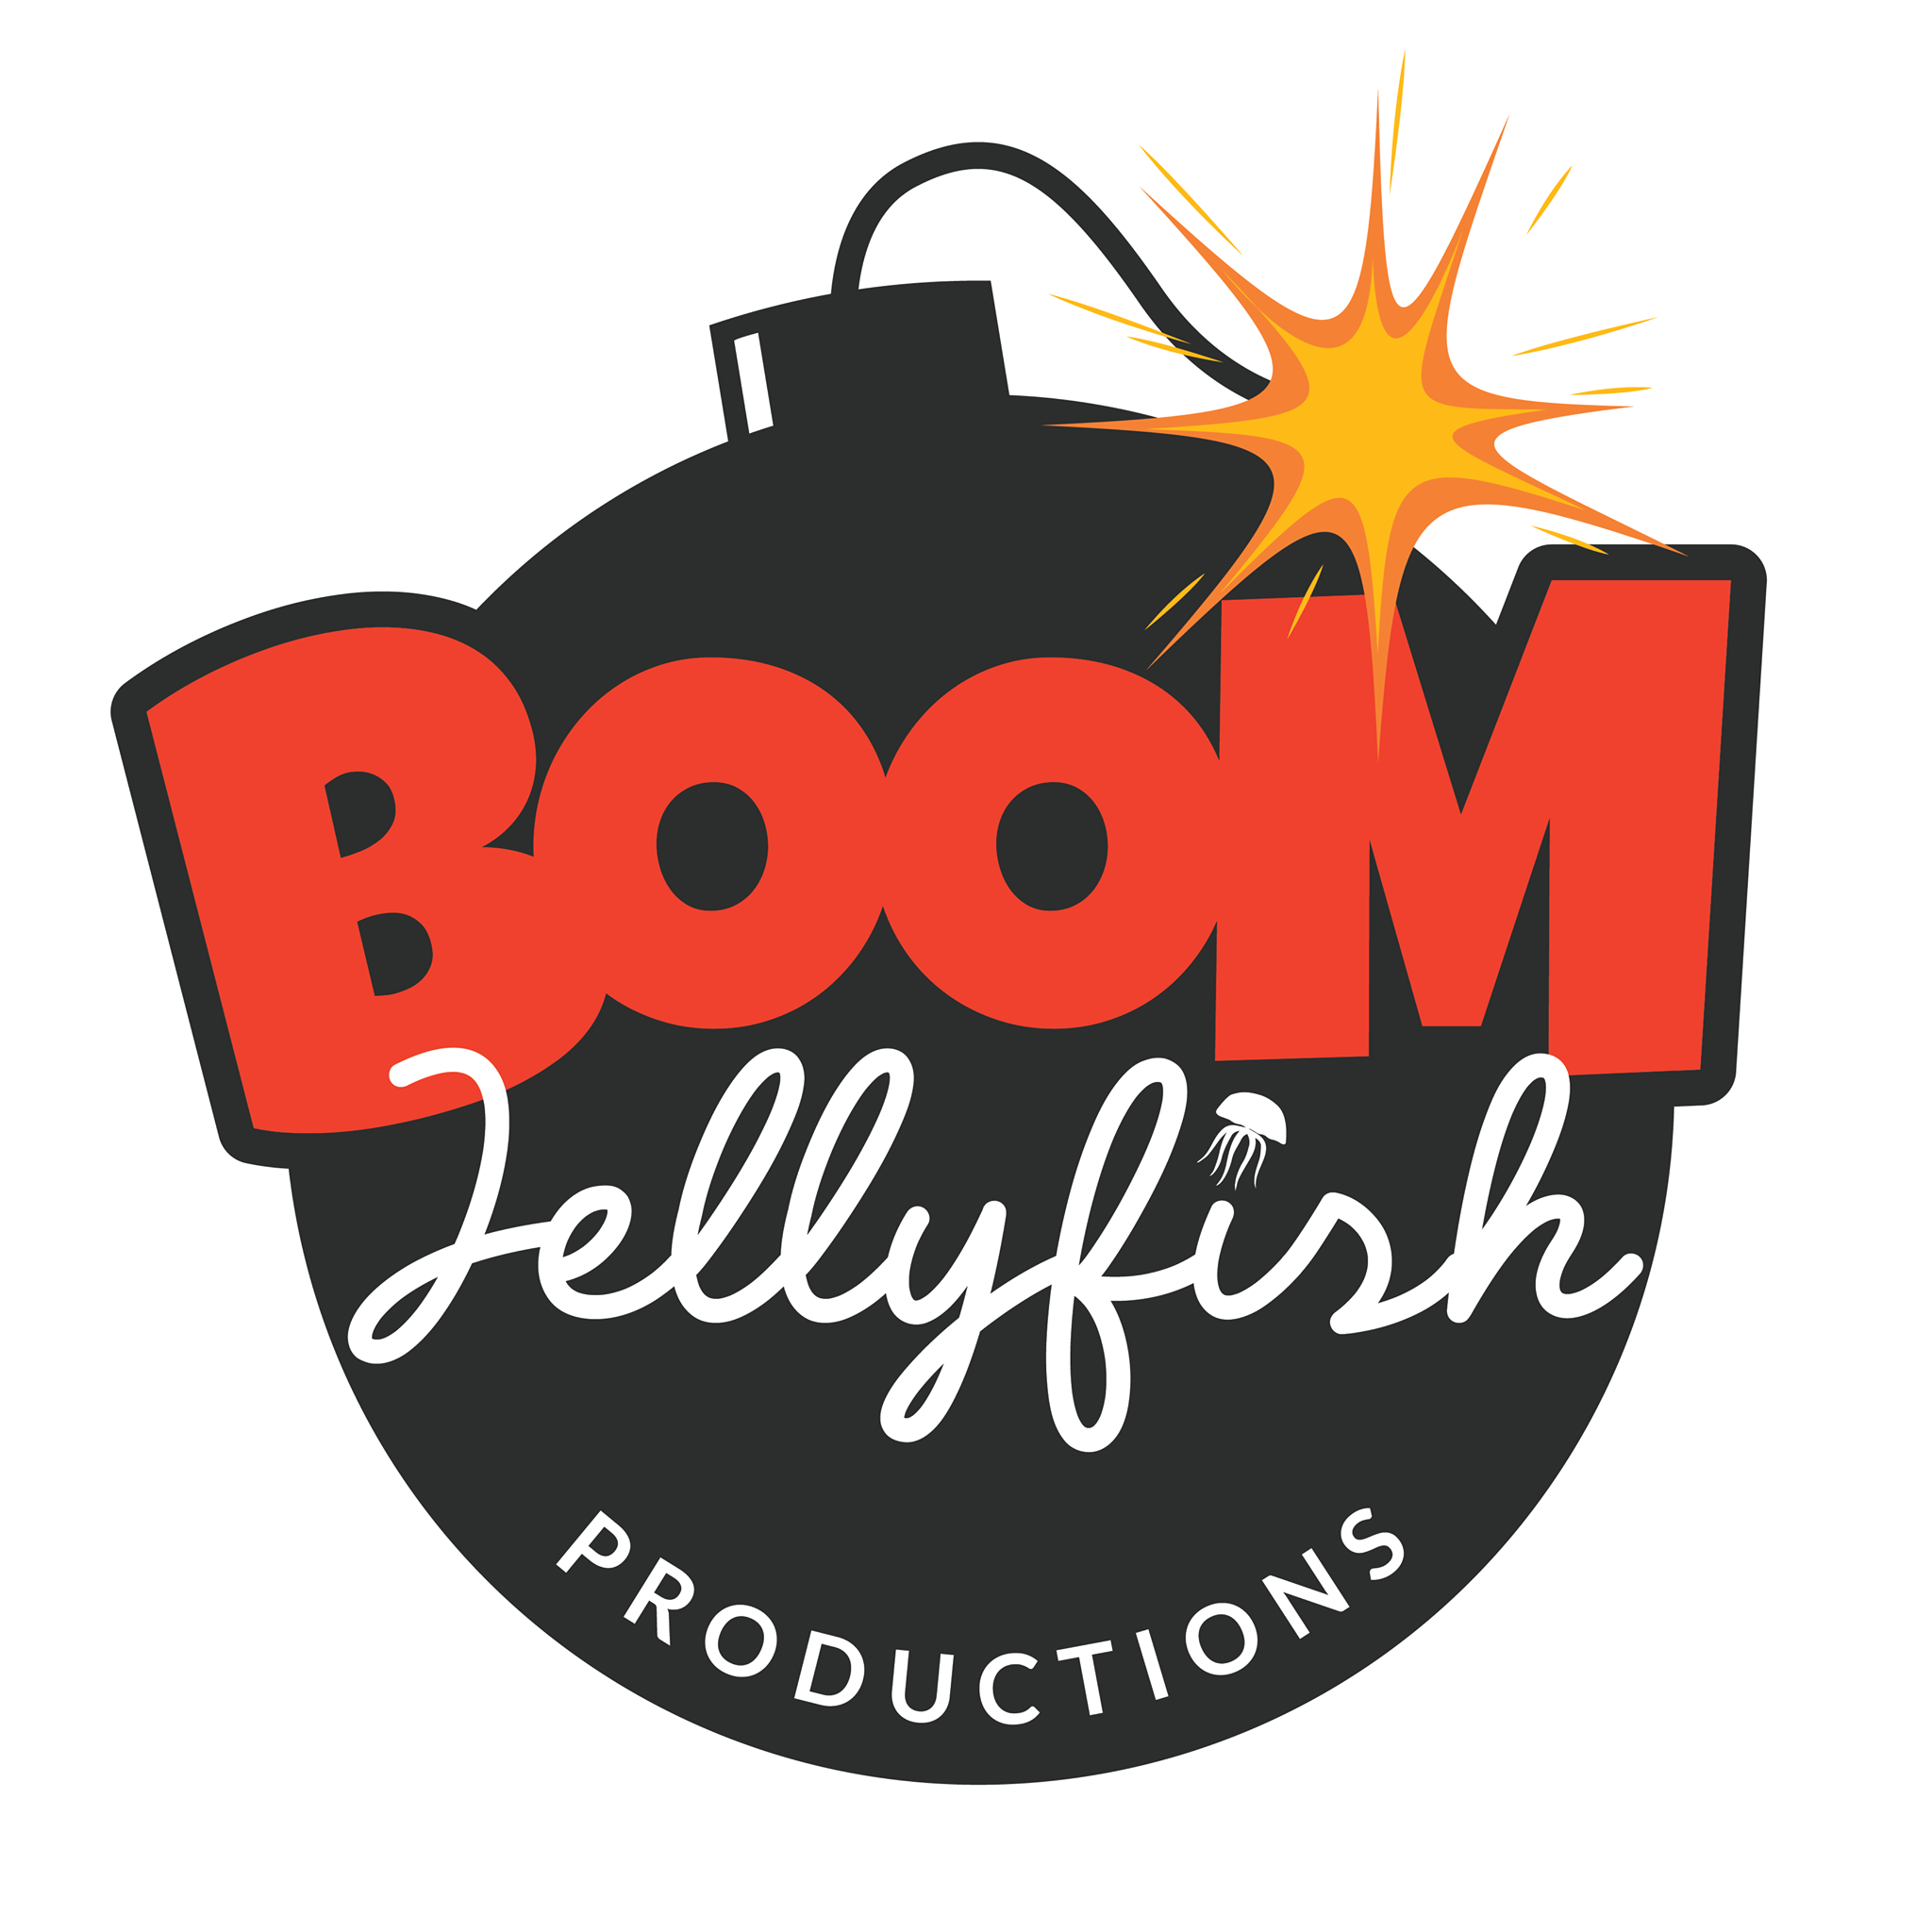 Boom Jellyfish Productions